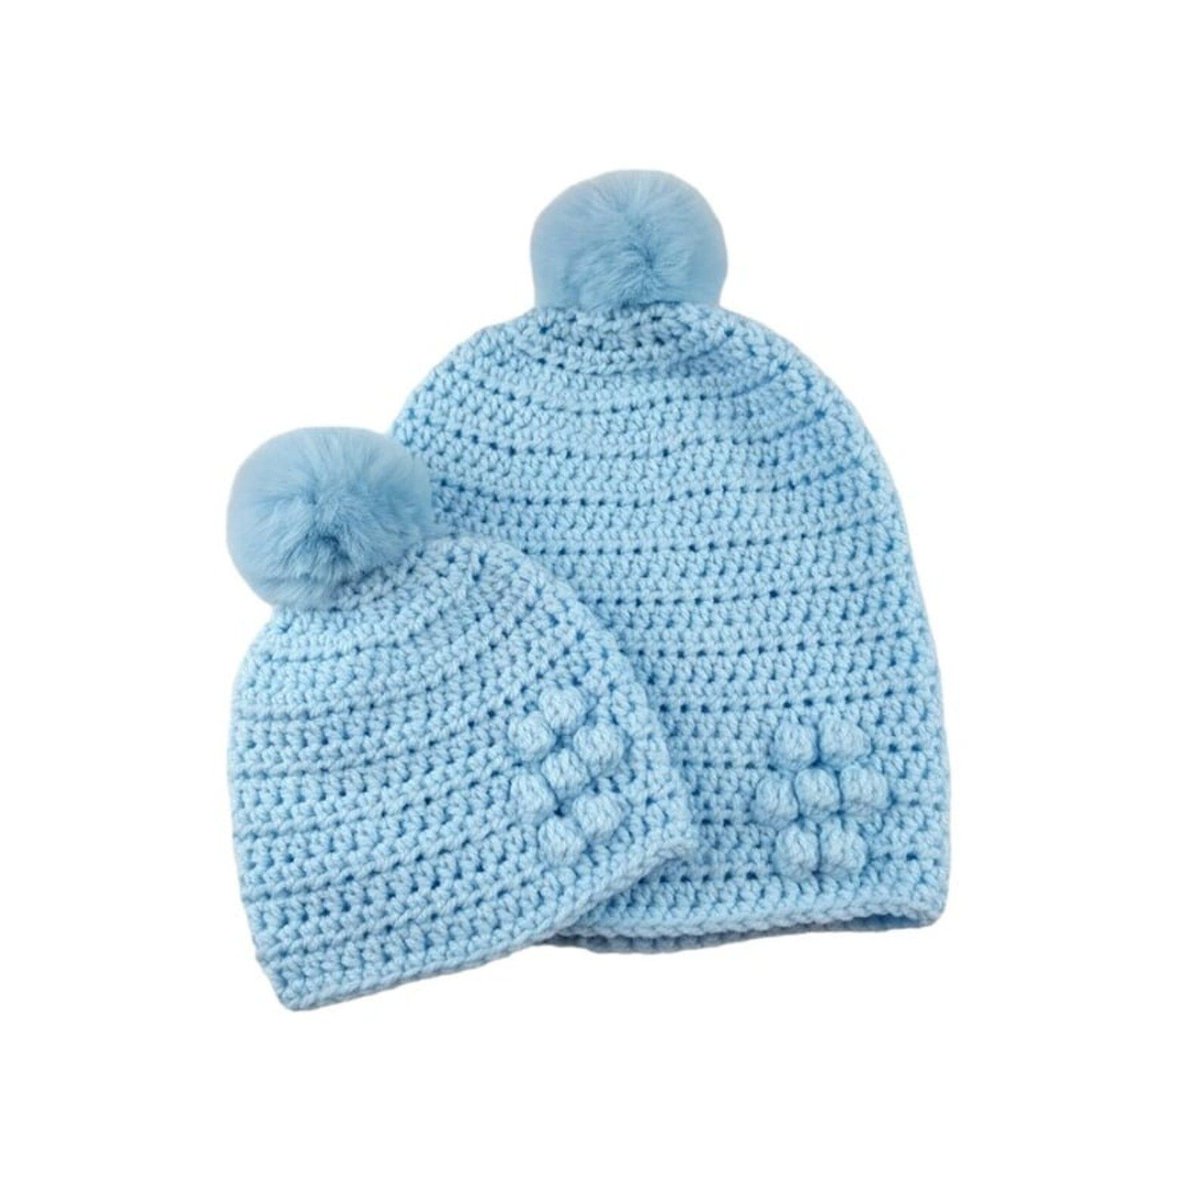 Check out these adorable matching light blue crocheted hats for mummy and baby! They feature a lovely flower detail and detachable faux fur pompoms. Handmade with love. knittingtopia.etsy.com/listing/167118… #Knittingtopia #HandmadeBabyClothes #MummyAndBaby #craftbizparty #MHHSBD